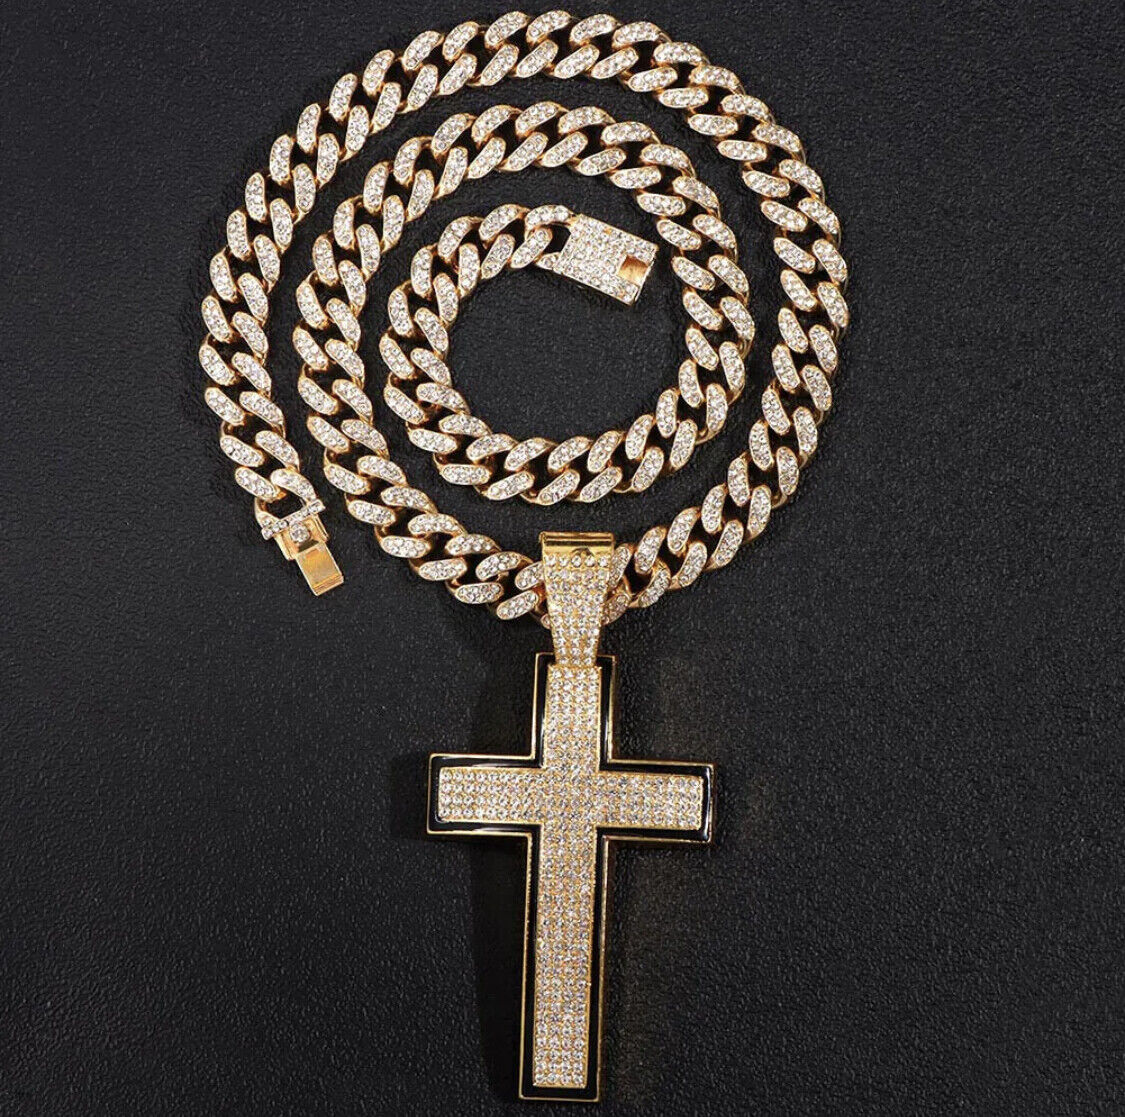 Large Victorian Cross Necklace Chain Silver Religious Gothic Grunch  Whimsgoth | eBay